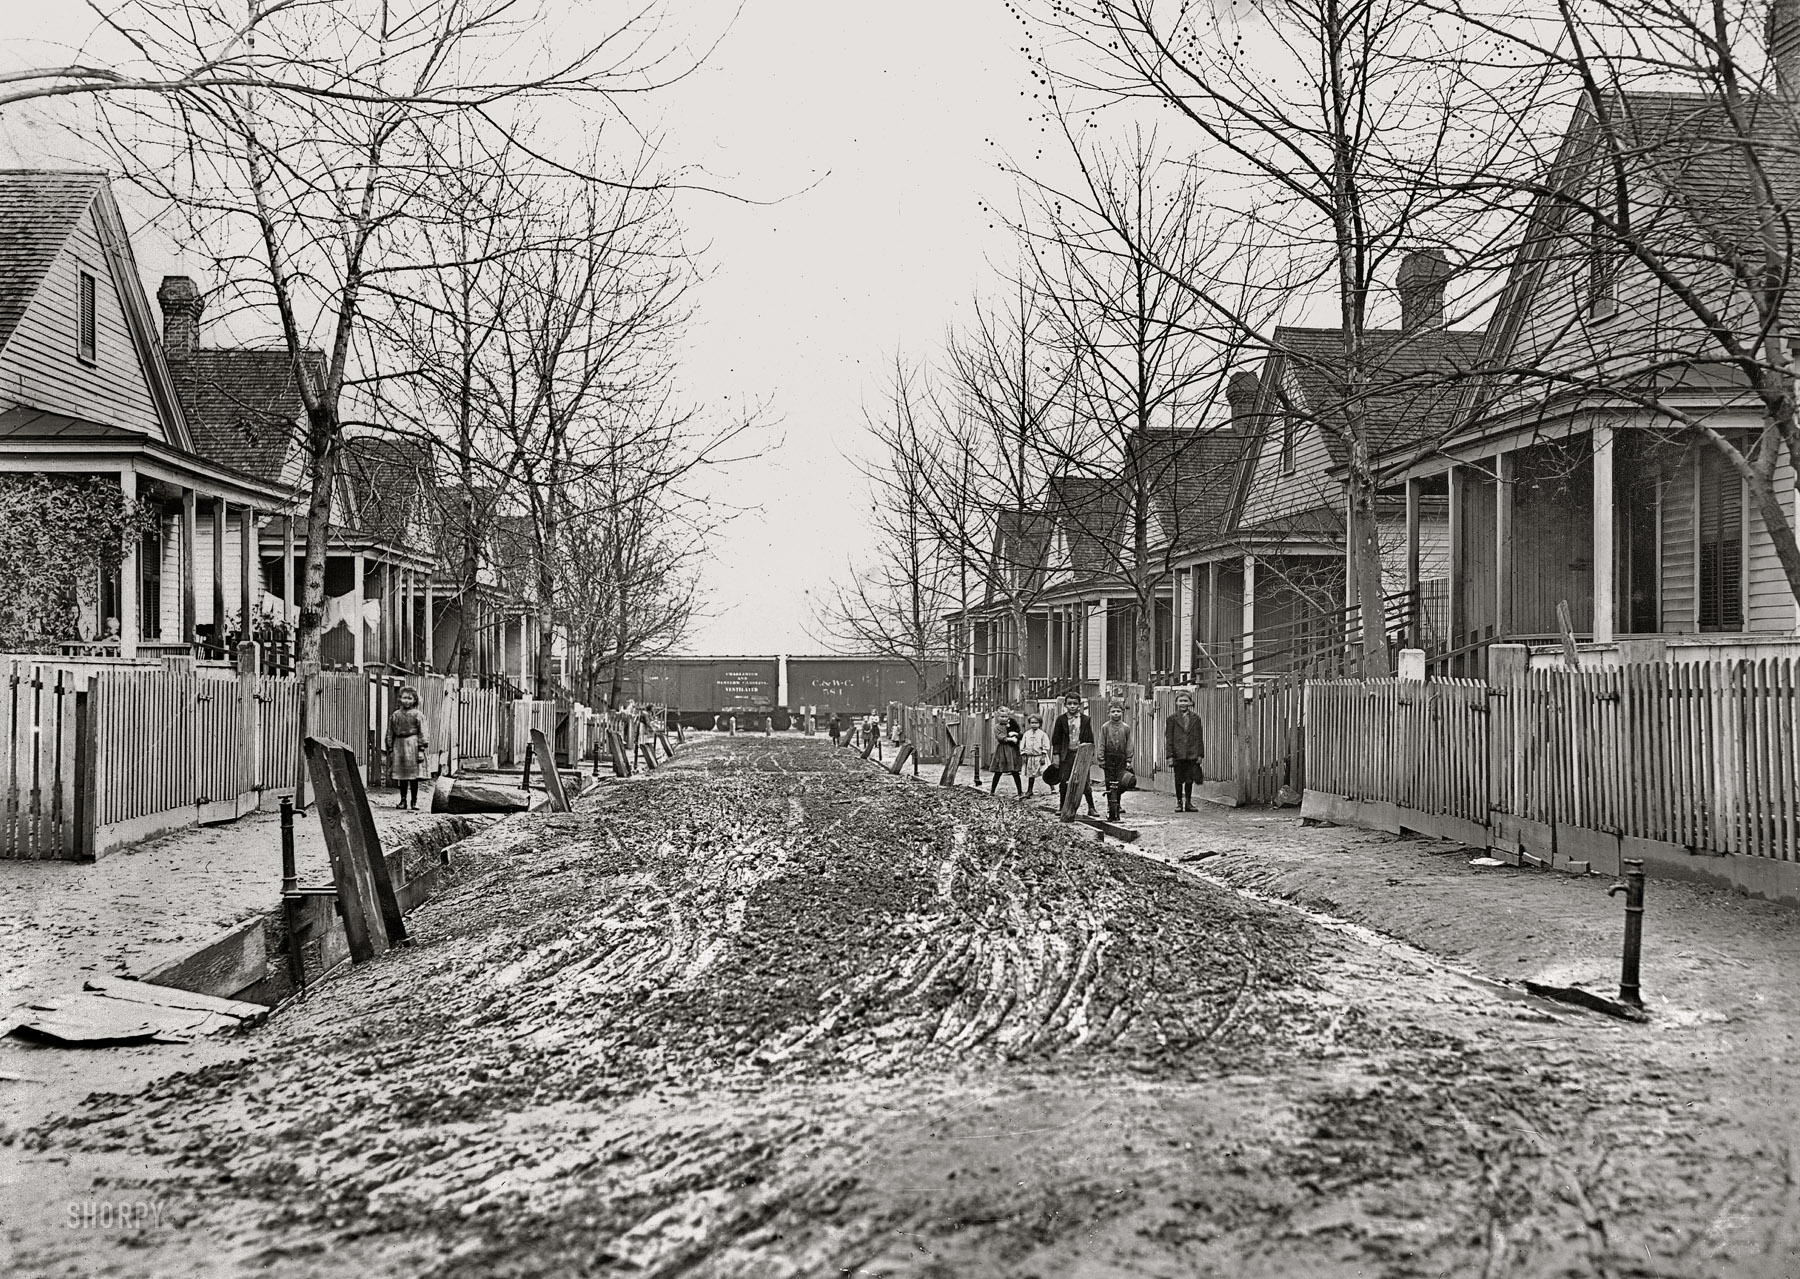 January 1909. "Augusta, Georgia. A typical street scene in Gregtown where the employees in King Mill live. The Secretary of Associated Charities said this is the most degraded part of Augusta." Photo by Lewis Wickes Hine. View full size.